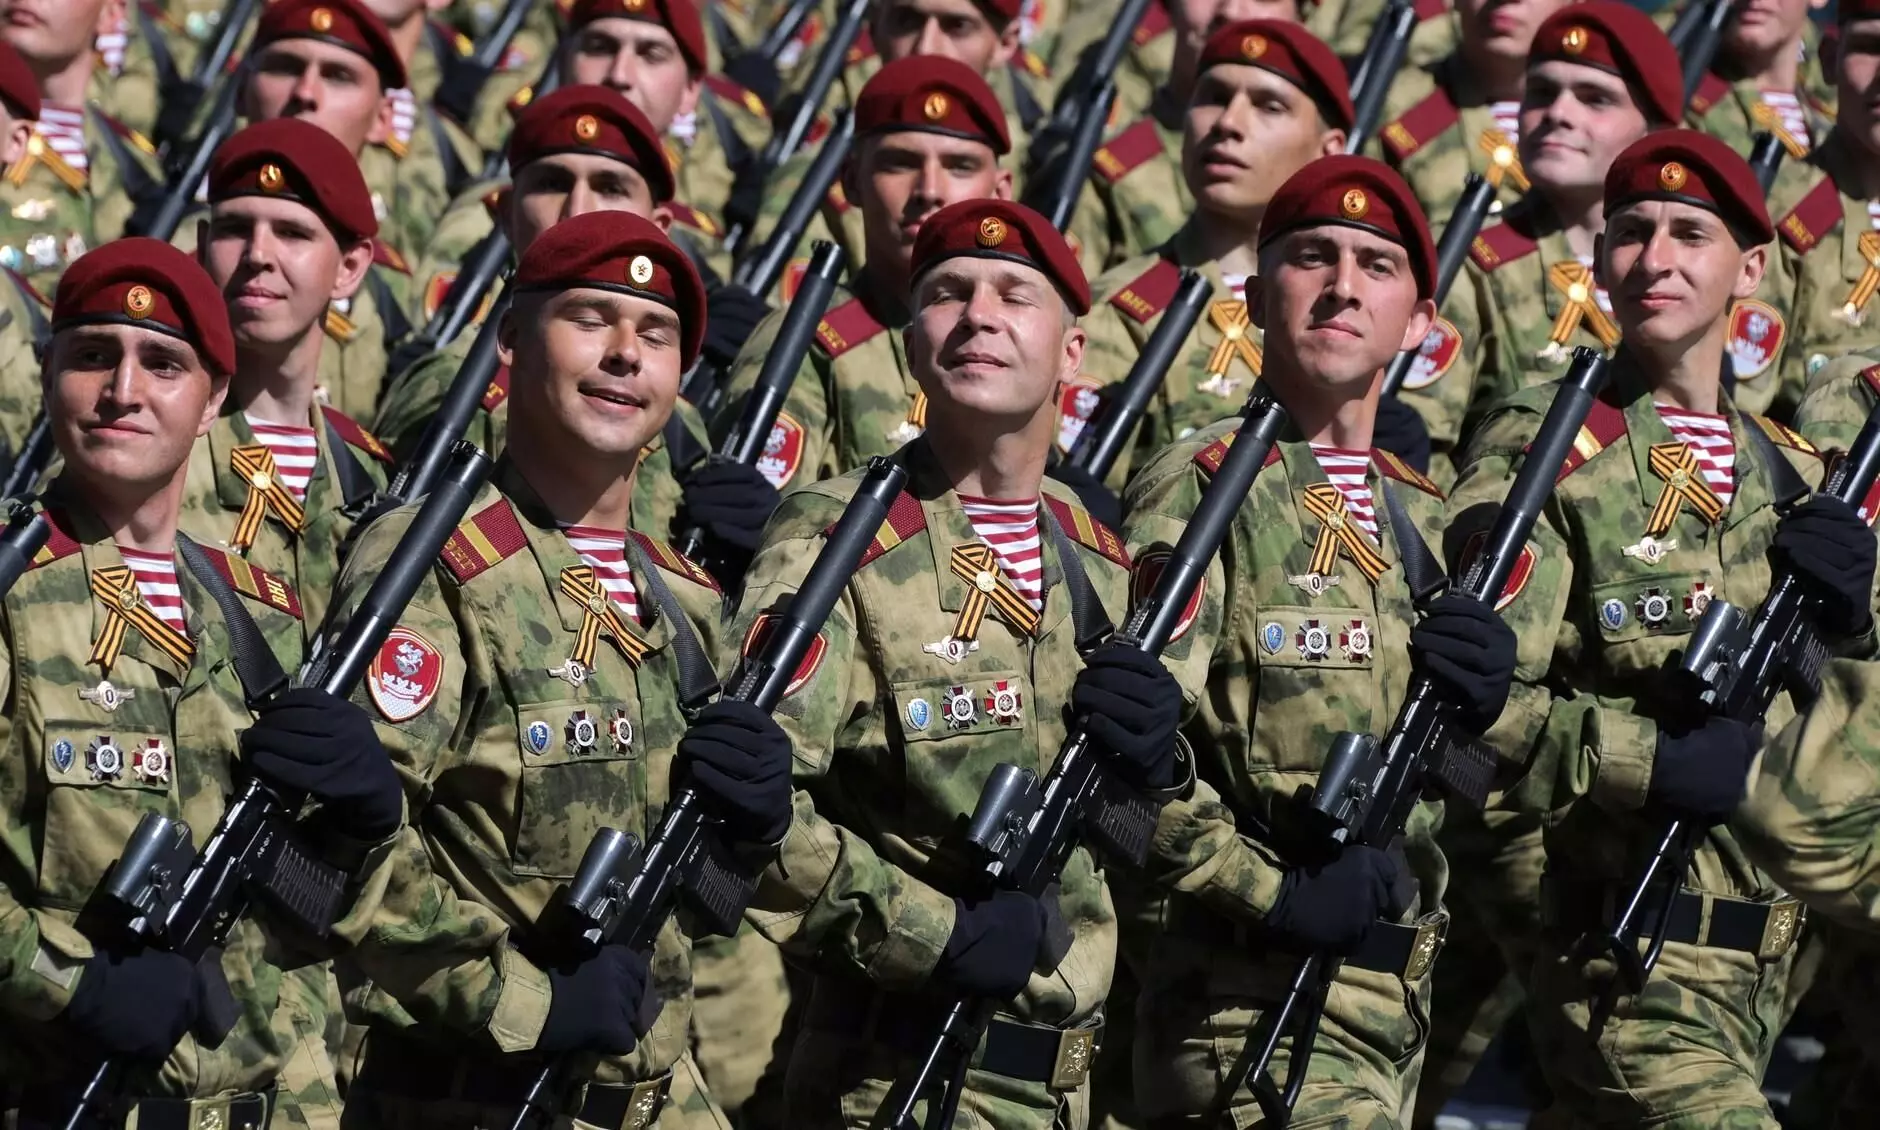 Russia is to vaccinate 4 lakh people in armed forces